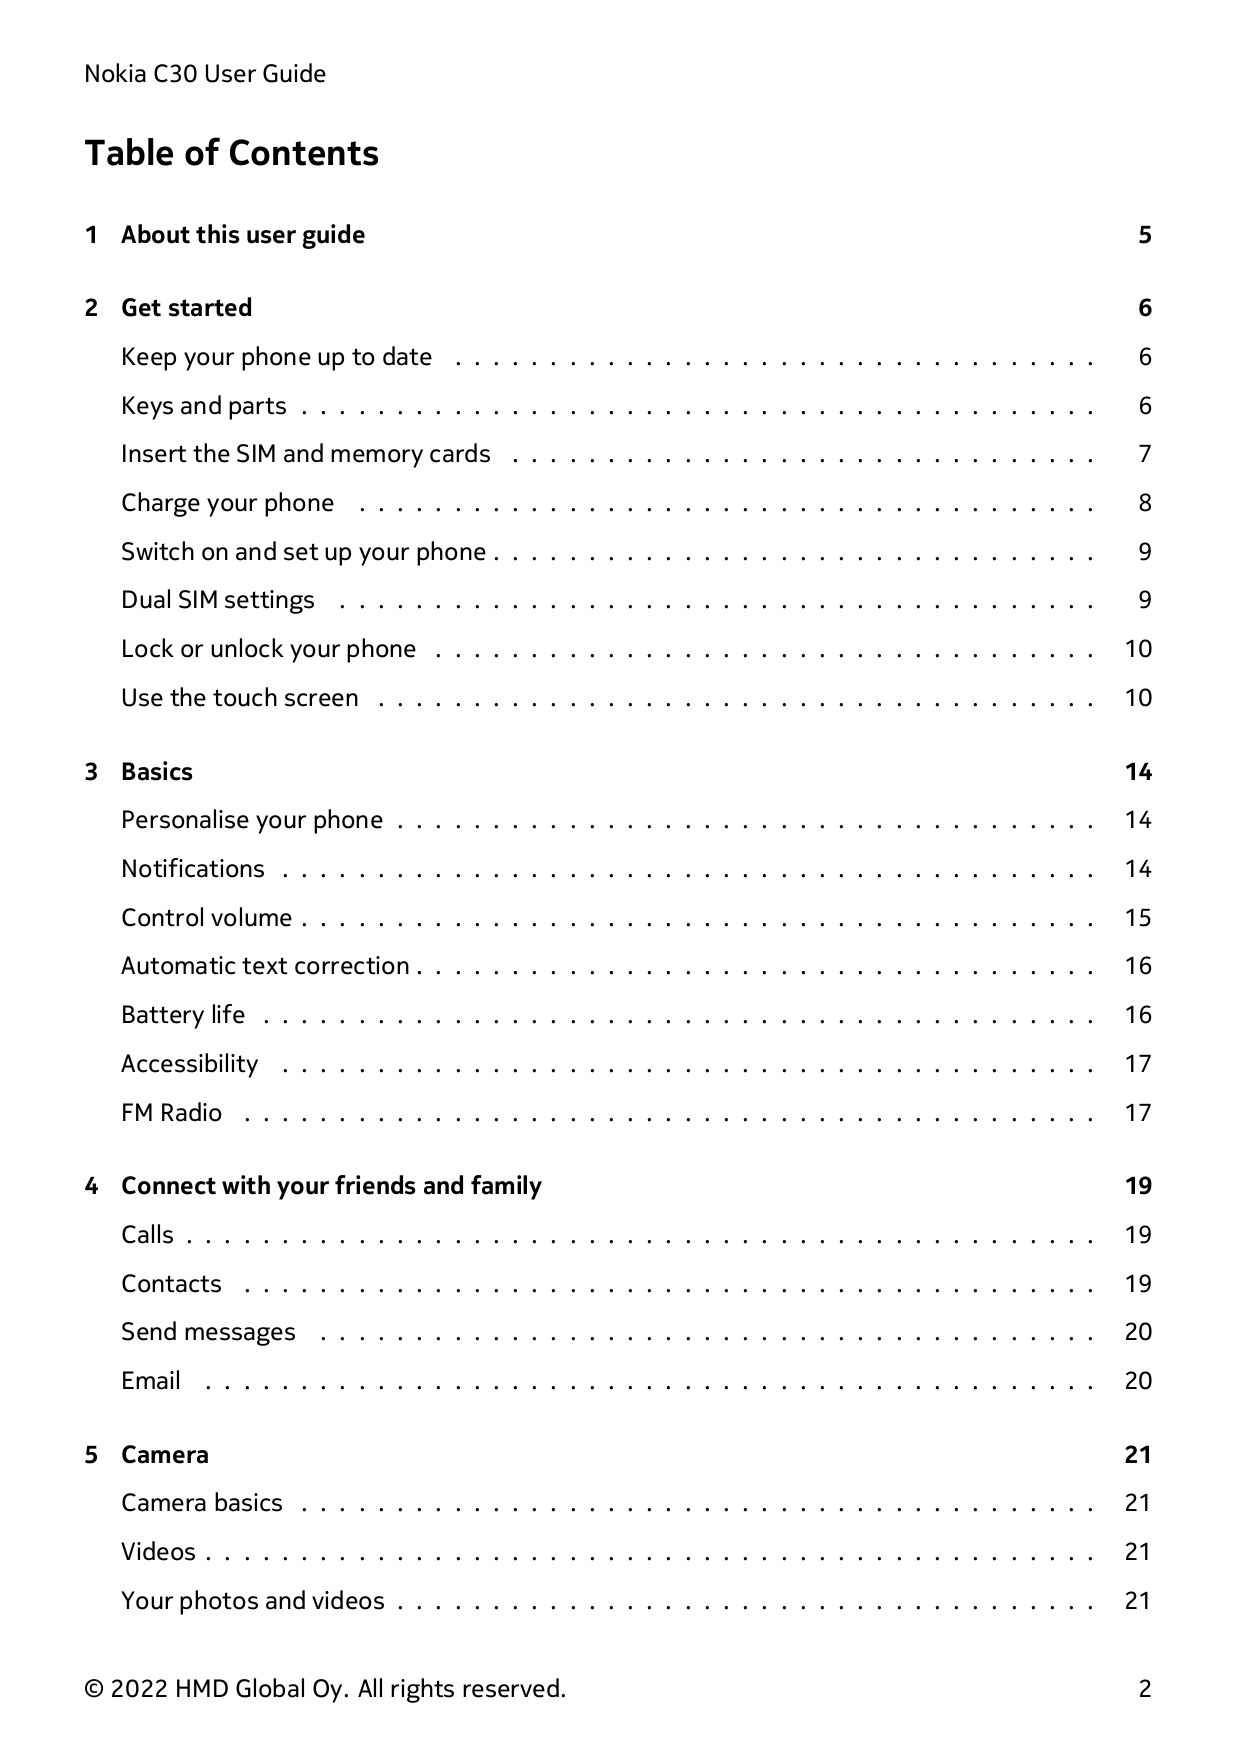 Nokia C30 User GuideTable of Contents1 About this user guide52 Get started6Keep your phone up to date . . . . . . . . . . . . . 